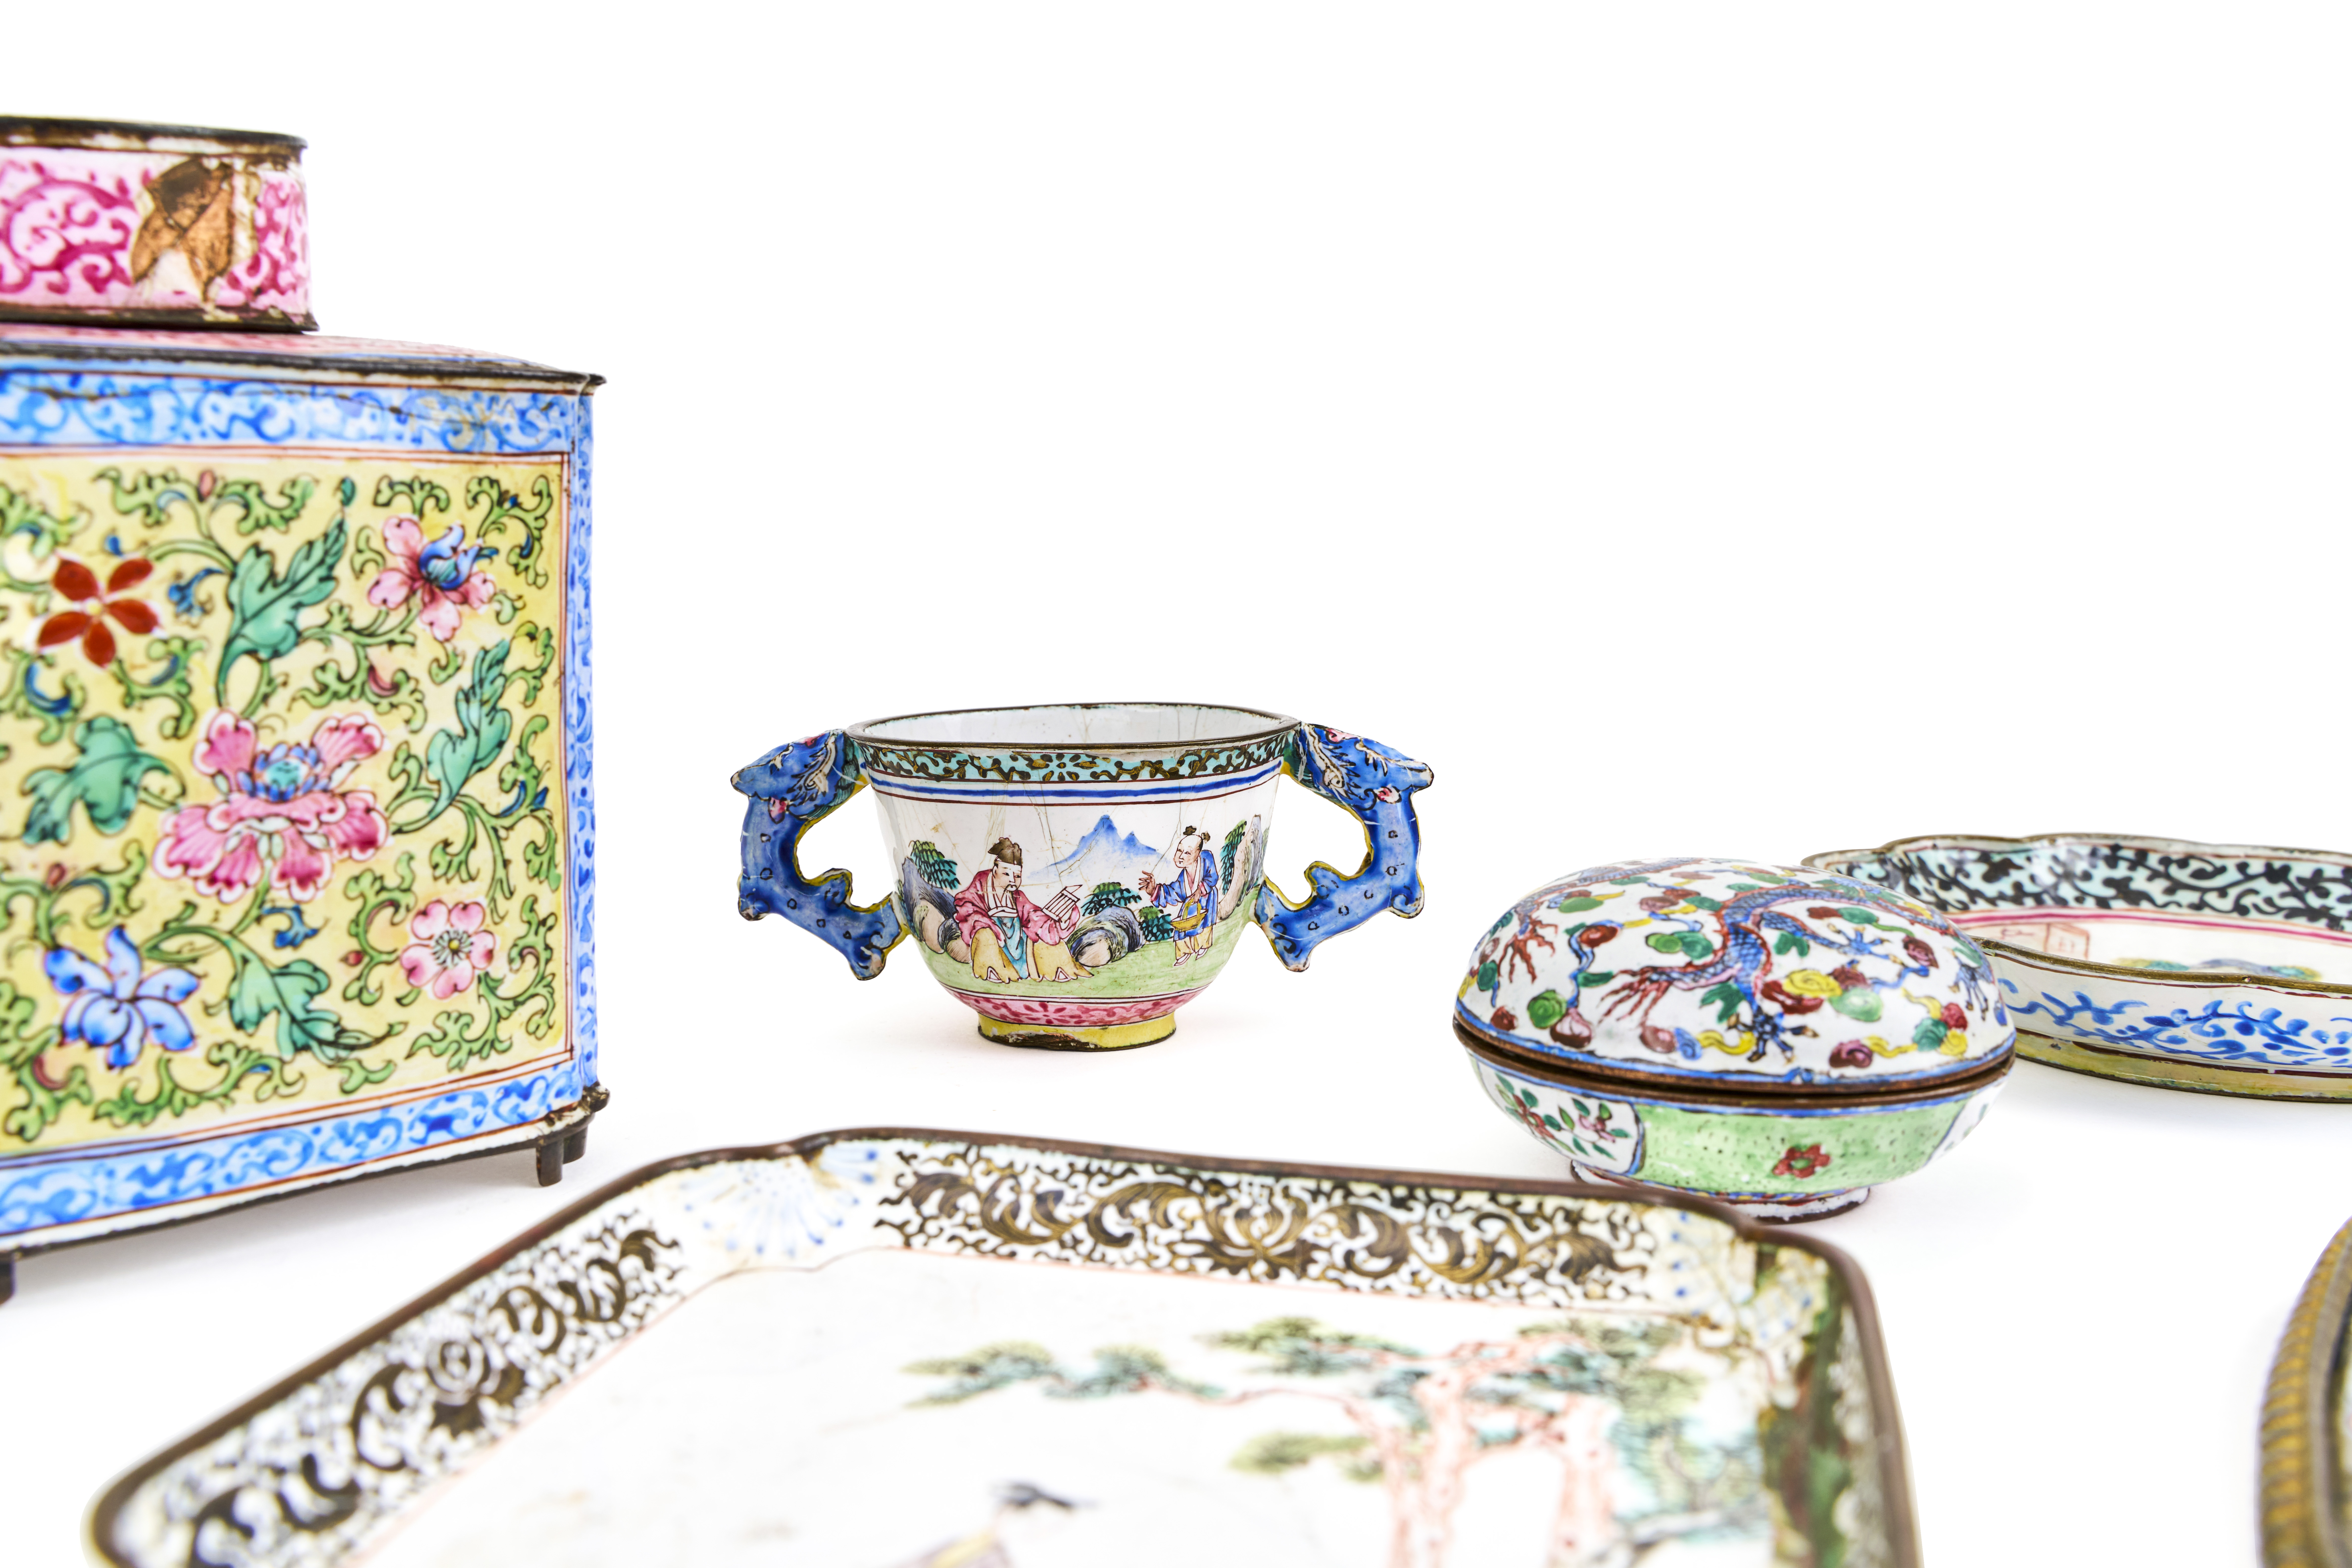 ASSORTMENT OF CHINESE CANTON ENAMEL OBJECTS, 18TH/19TH CENTURY - Image 2 of 6